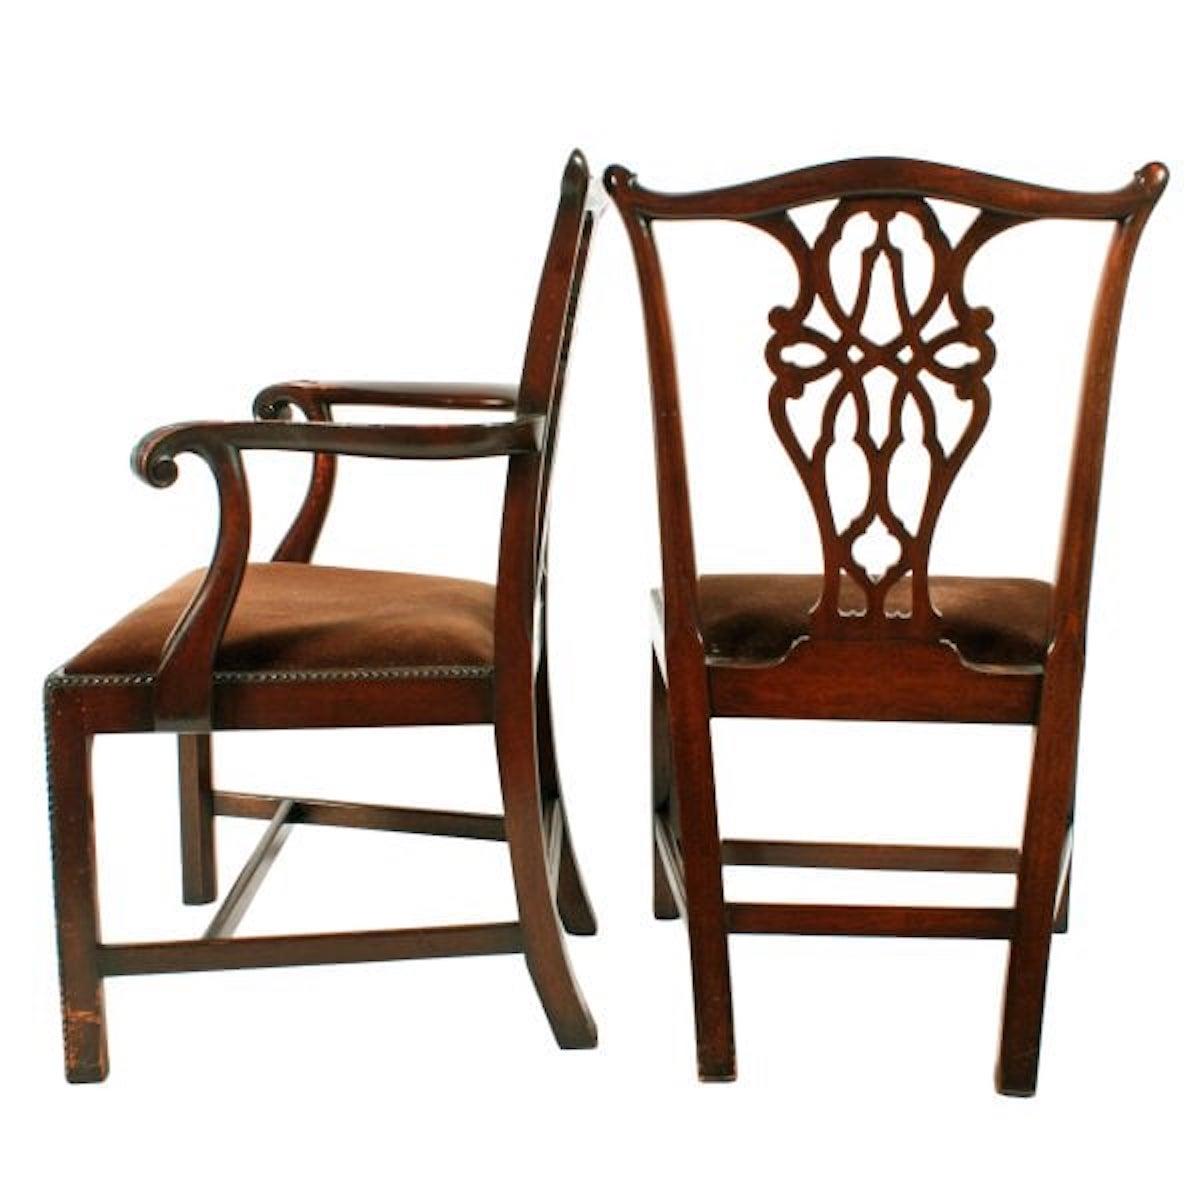 Set of Eight Chippendale Style Chairs

A set of Georgian style Chippendale mahogany dining room chairs.

The set comprises six single chairs and a pair of elbow chairs.

The chair backs have a serpentine shaped top rail with a broad pierced